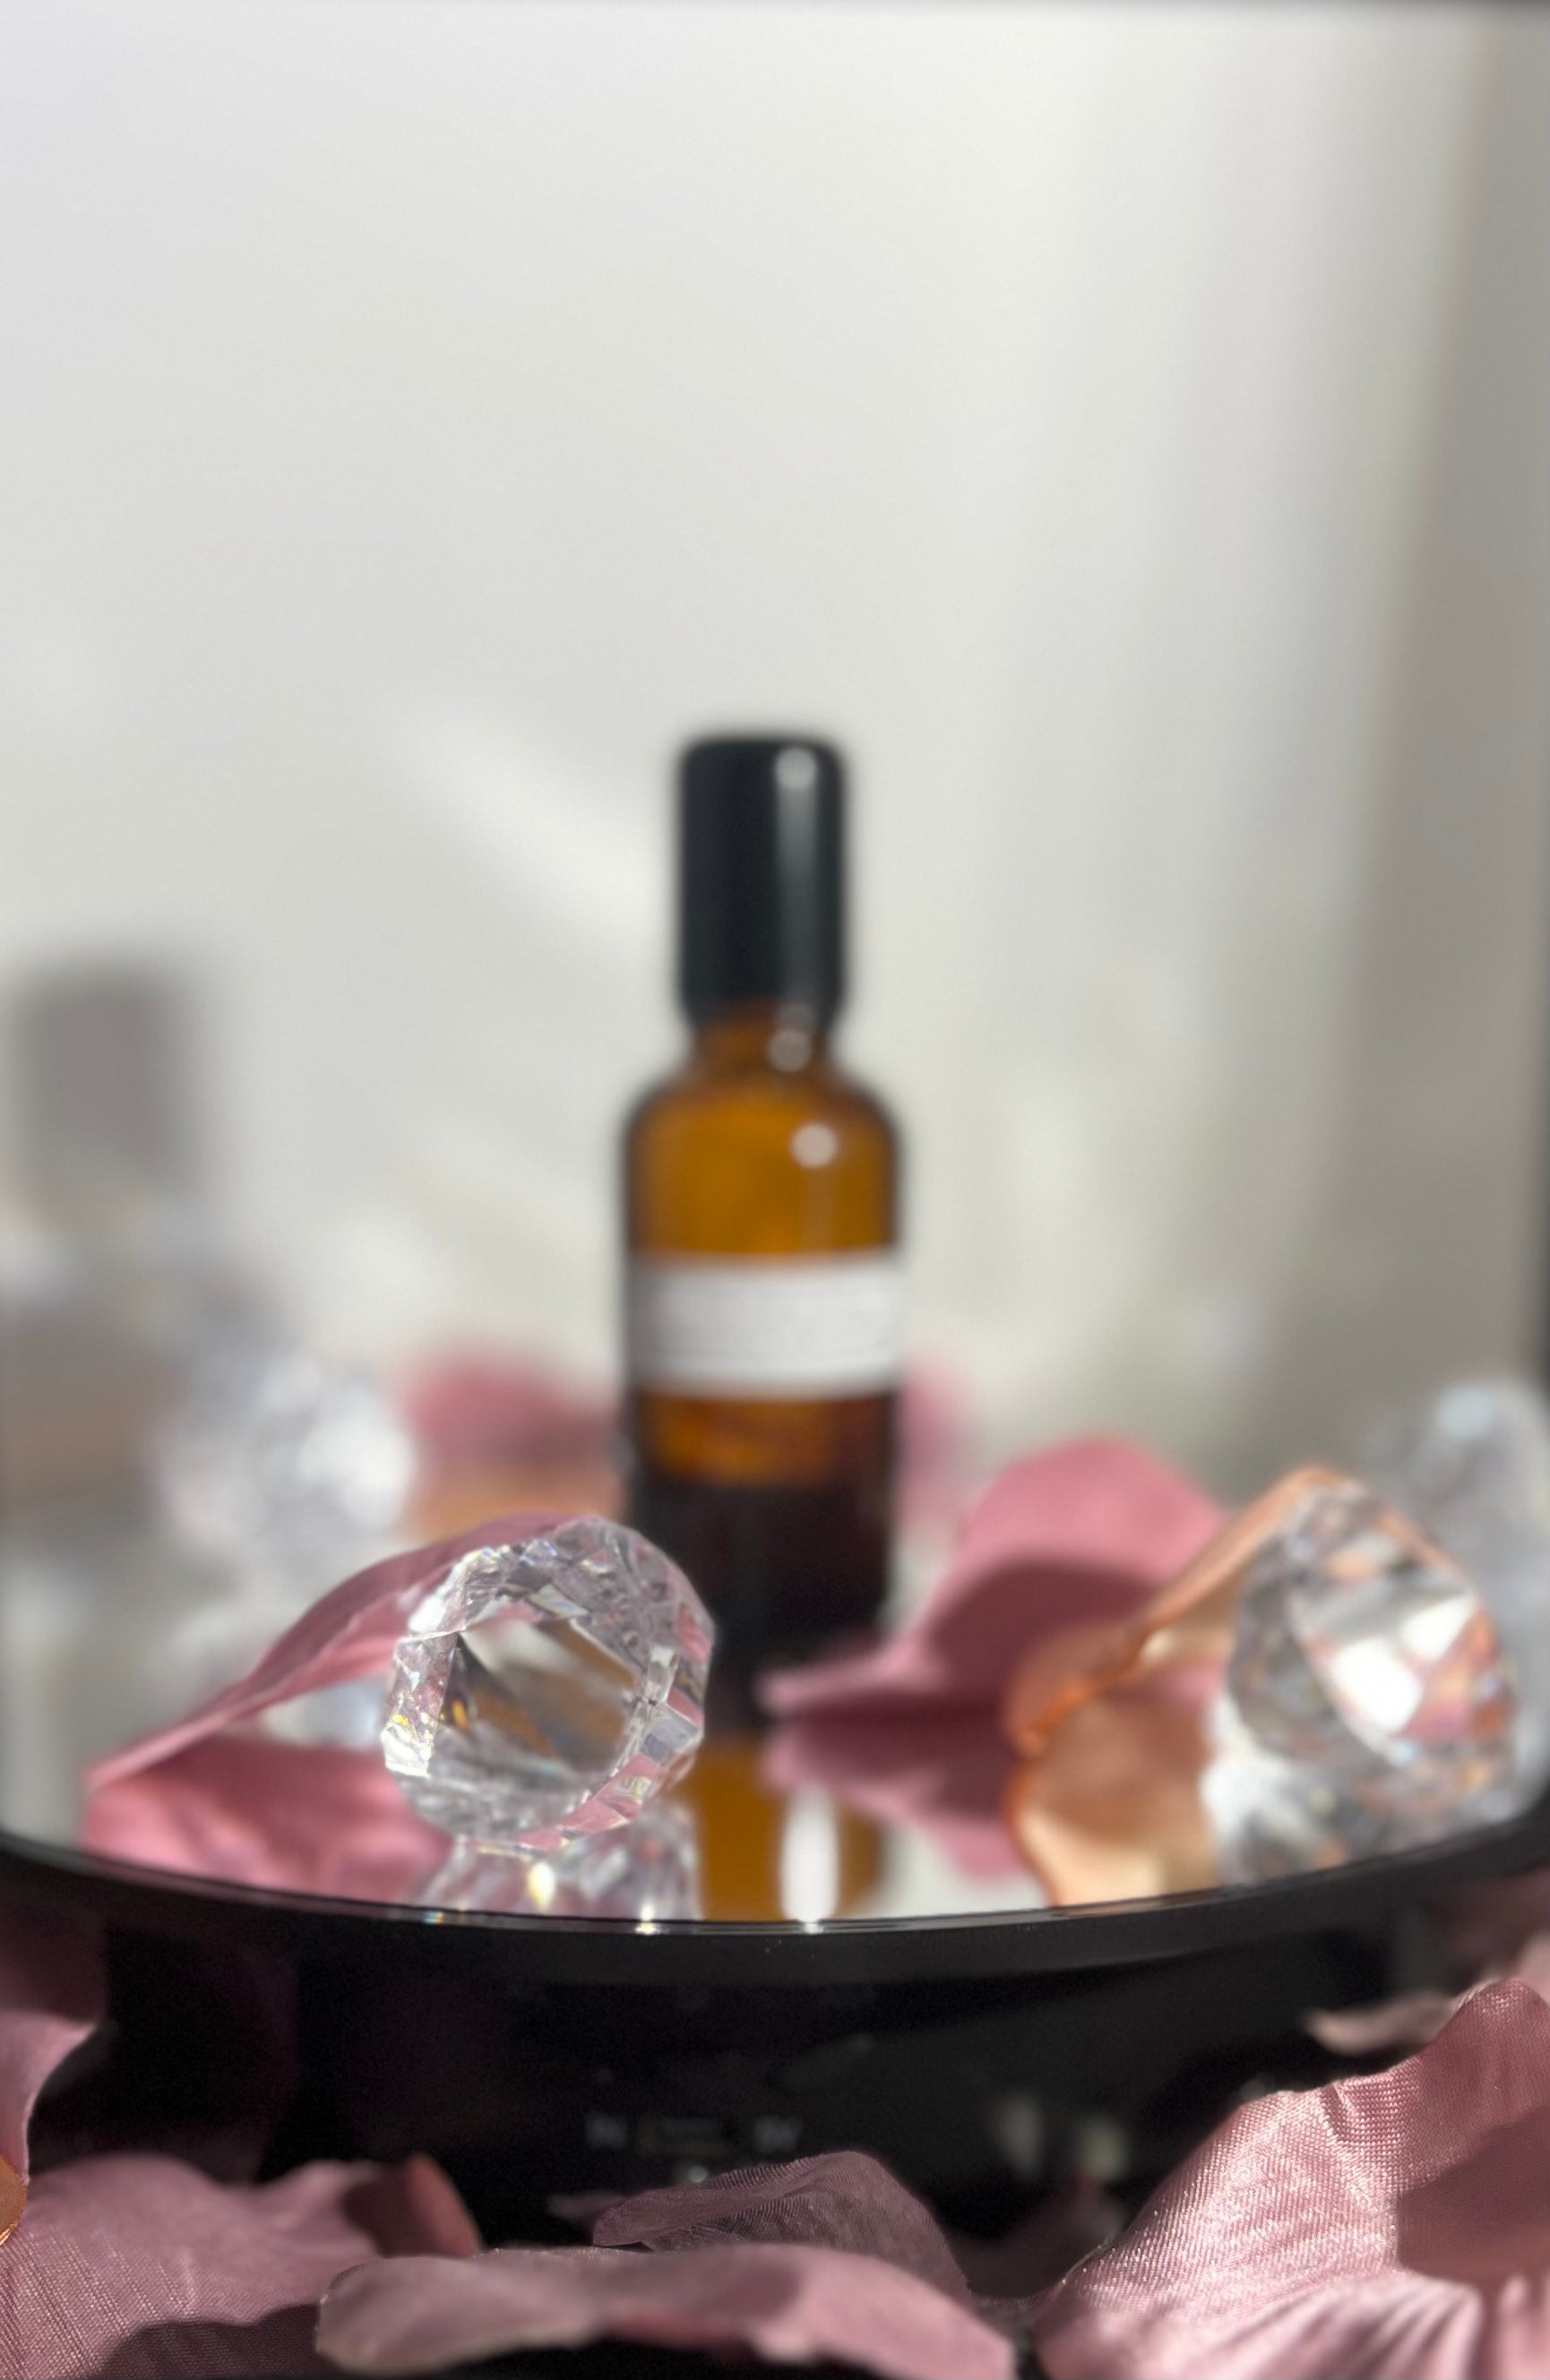 The Trail of Roses(Inspired by Parfum De Marly Delina) - Premium  from Scented Trail Body Oils  - Just $3.00! Shop now at Scented Trail Body Oils 